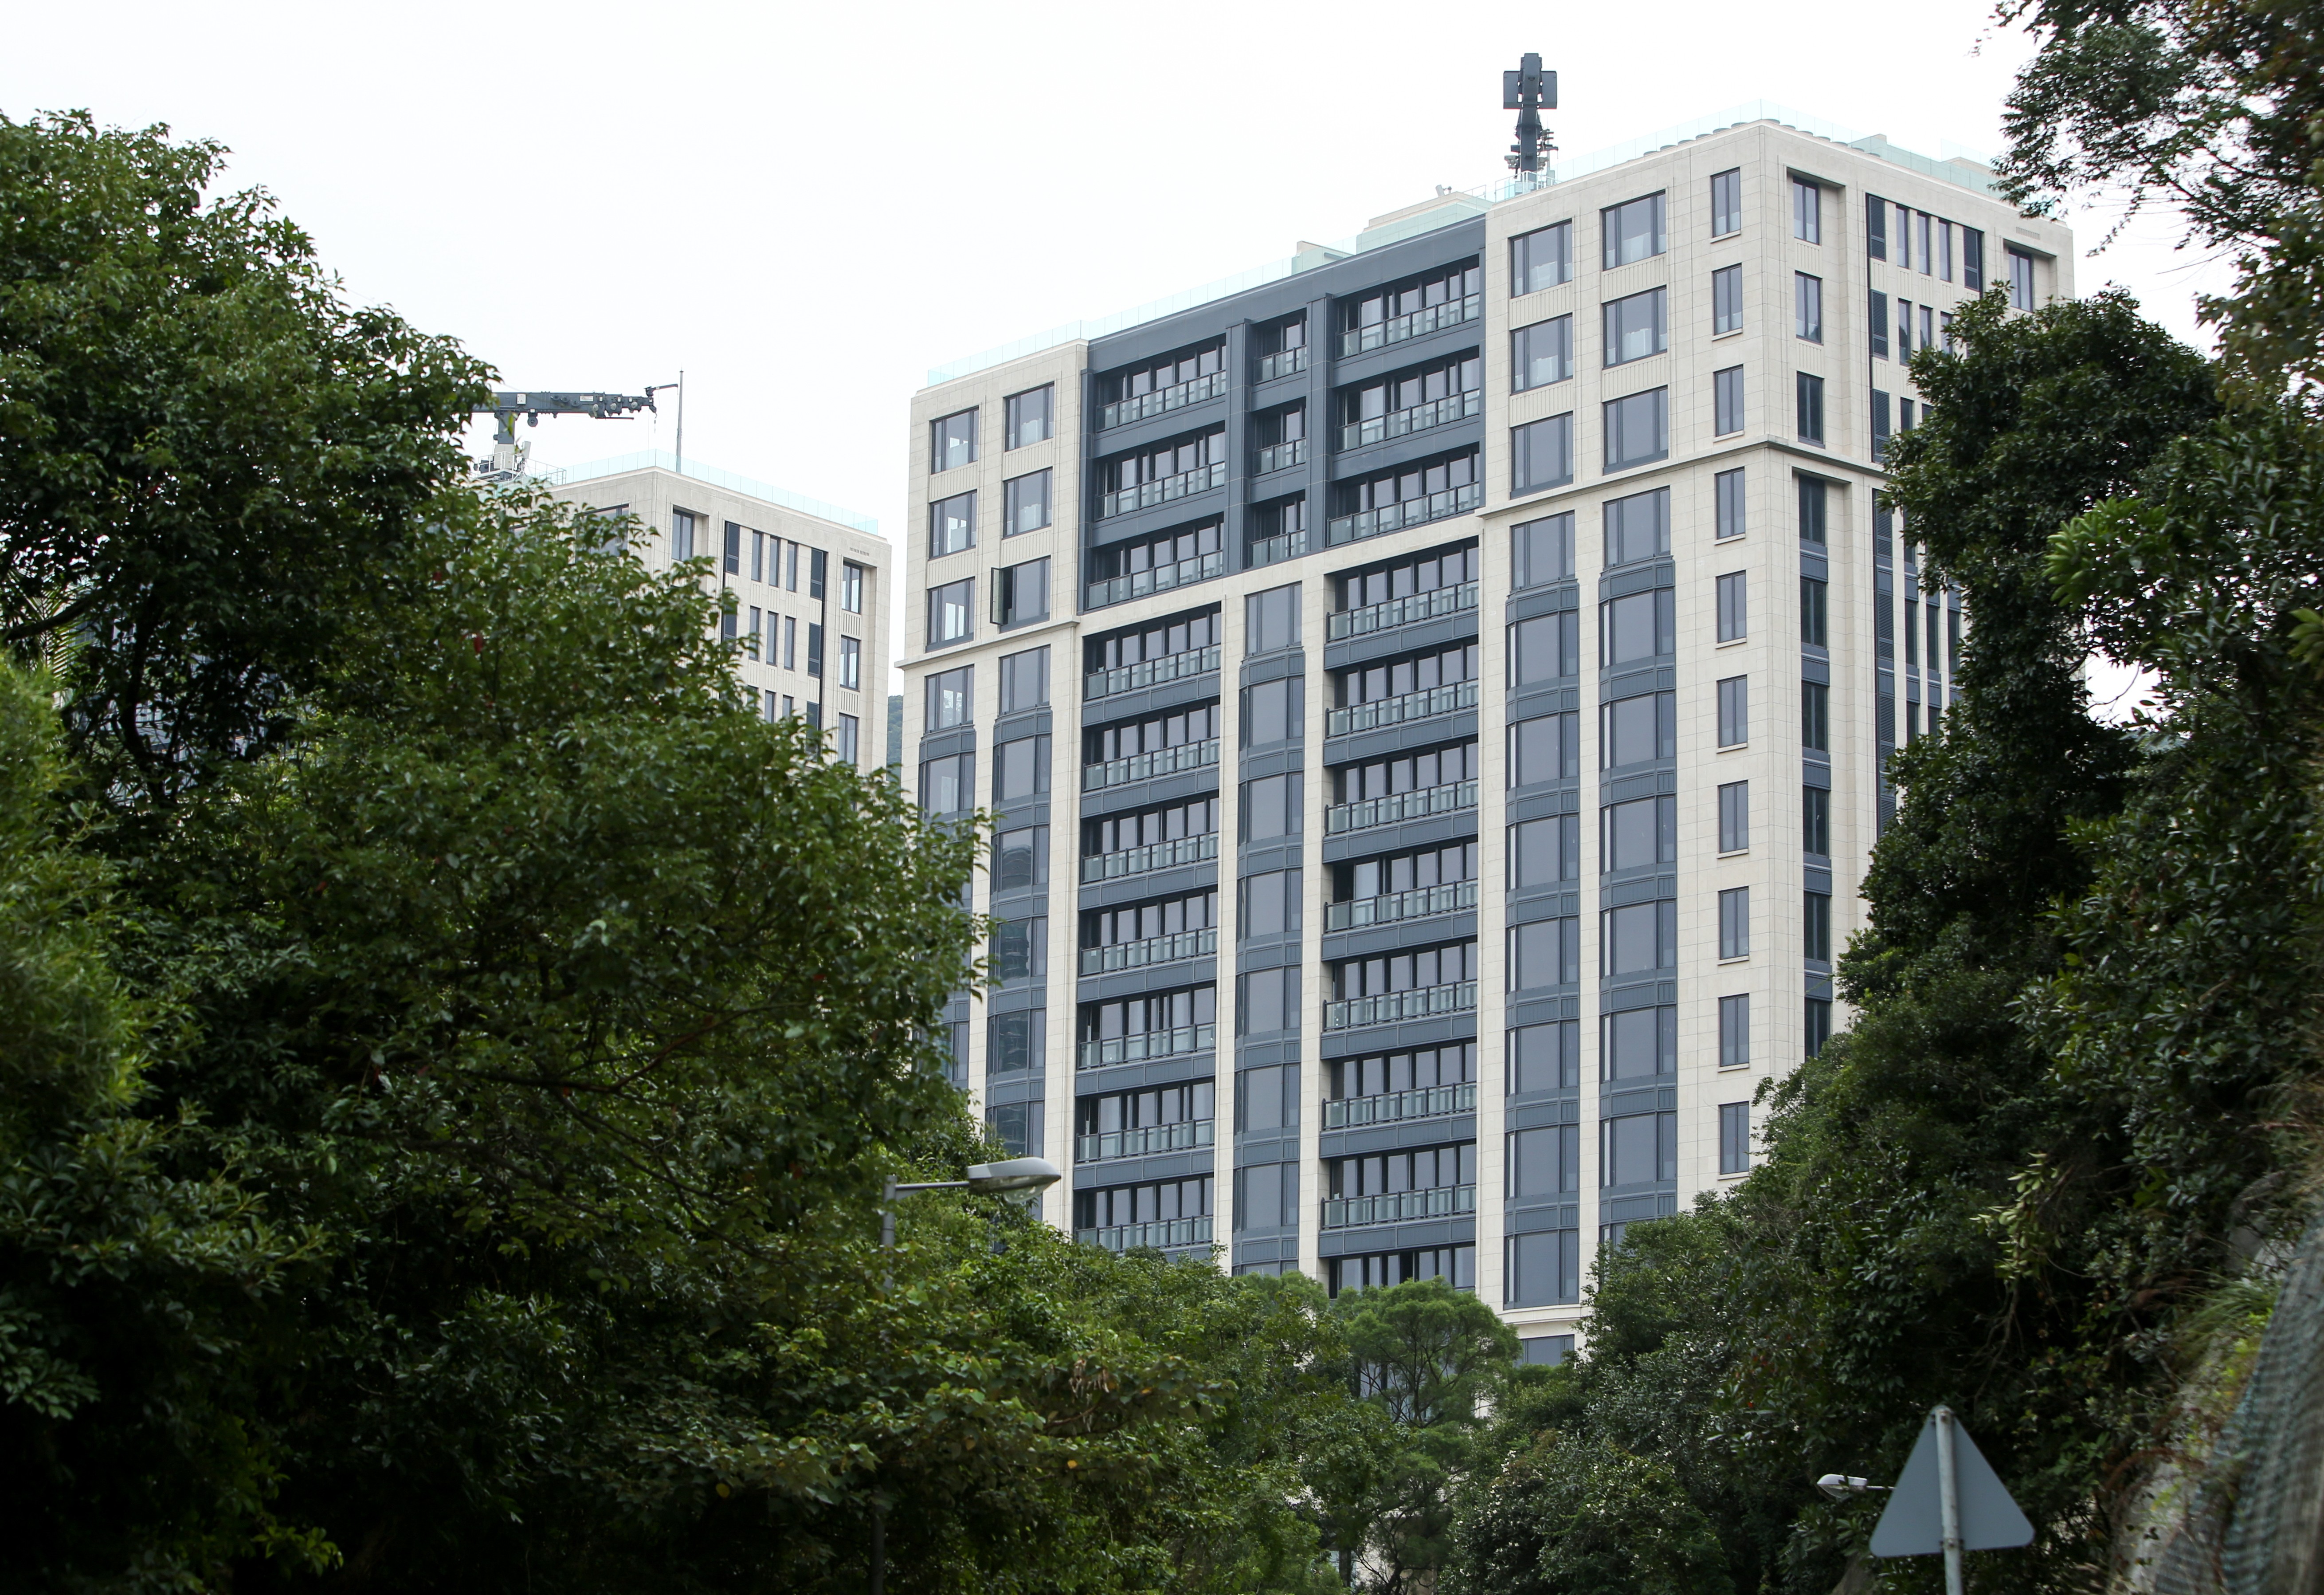 Flats at Mount Nicholson, jointly built by Wheelock & Co and Nan Fung, sold for an average HK$114,879 per square foot, 44 per cent above forecast. Photo: Edmond So